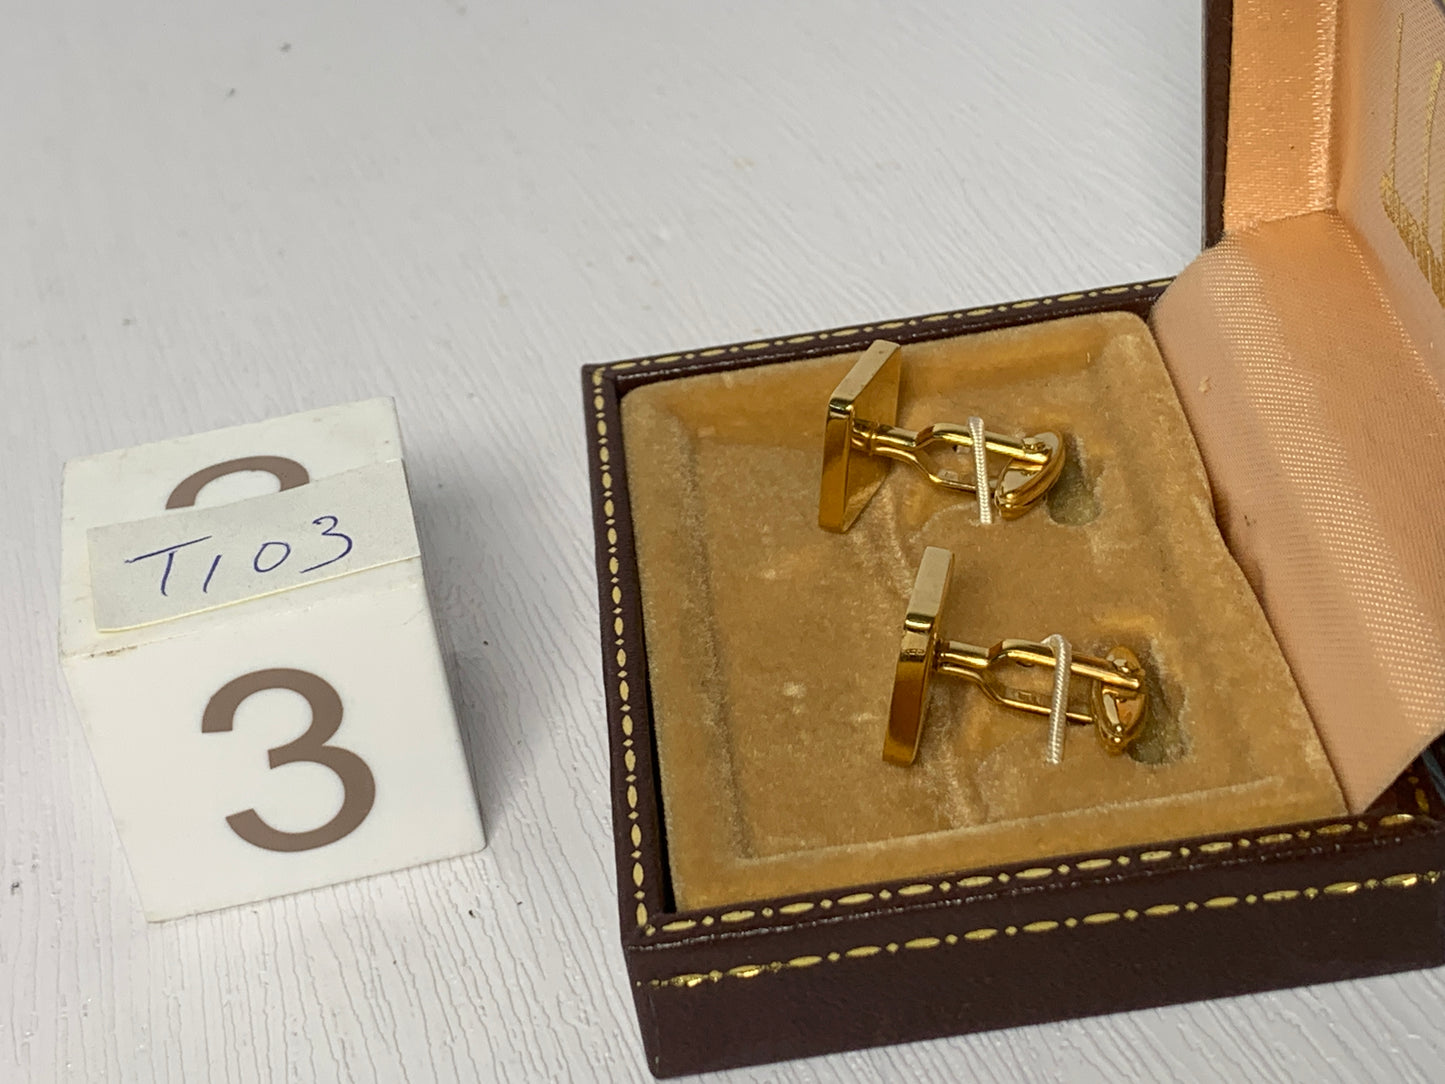 Vintage Tie clip dunhill  cufflinks with box  - 3MAR